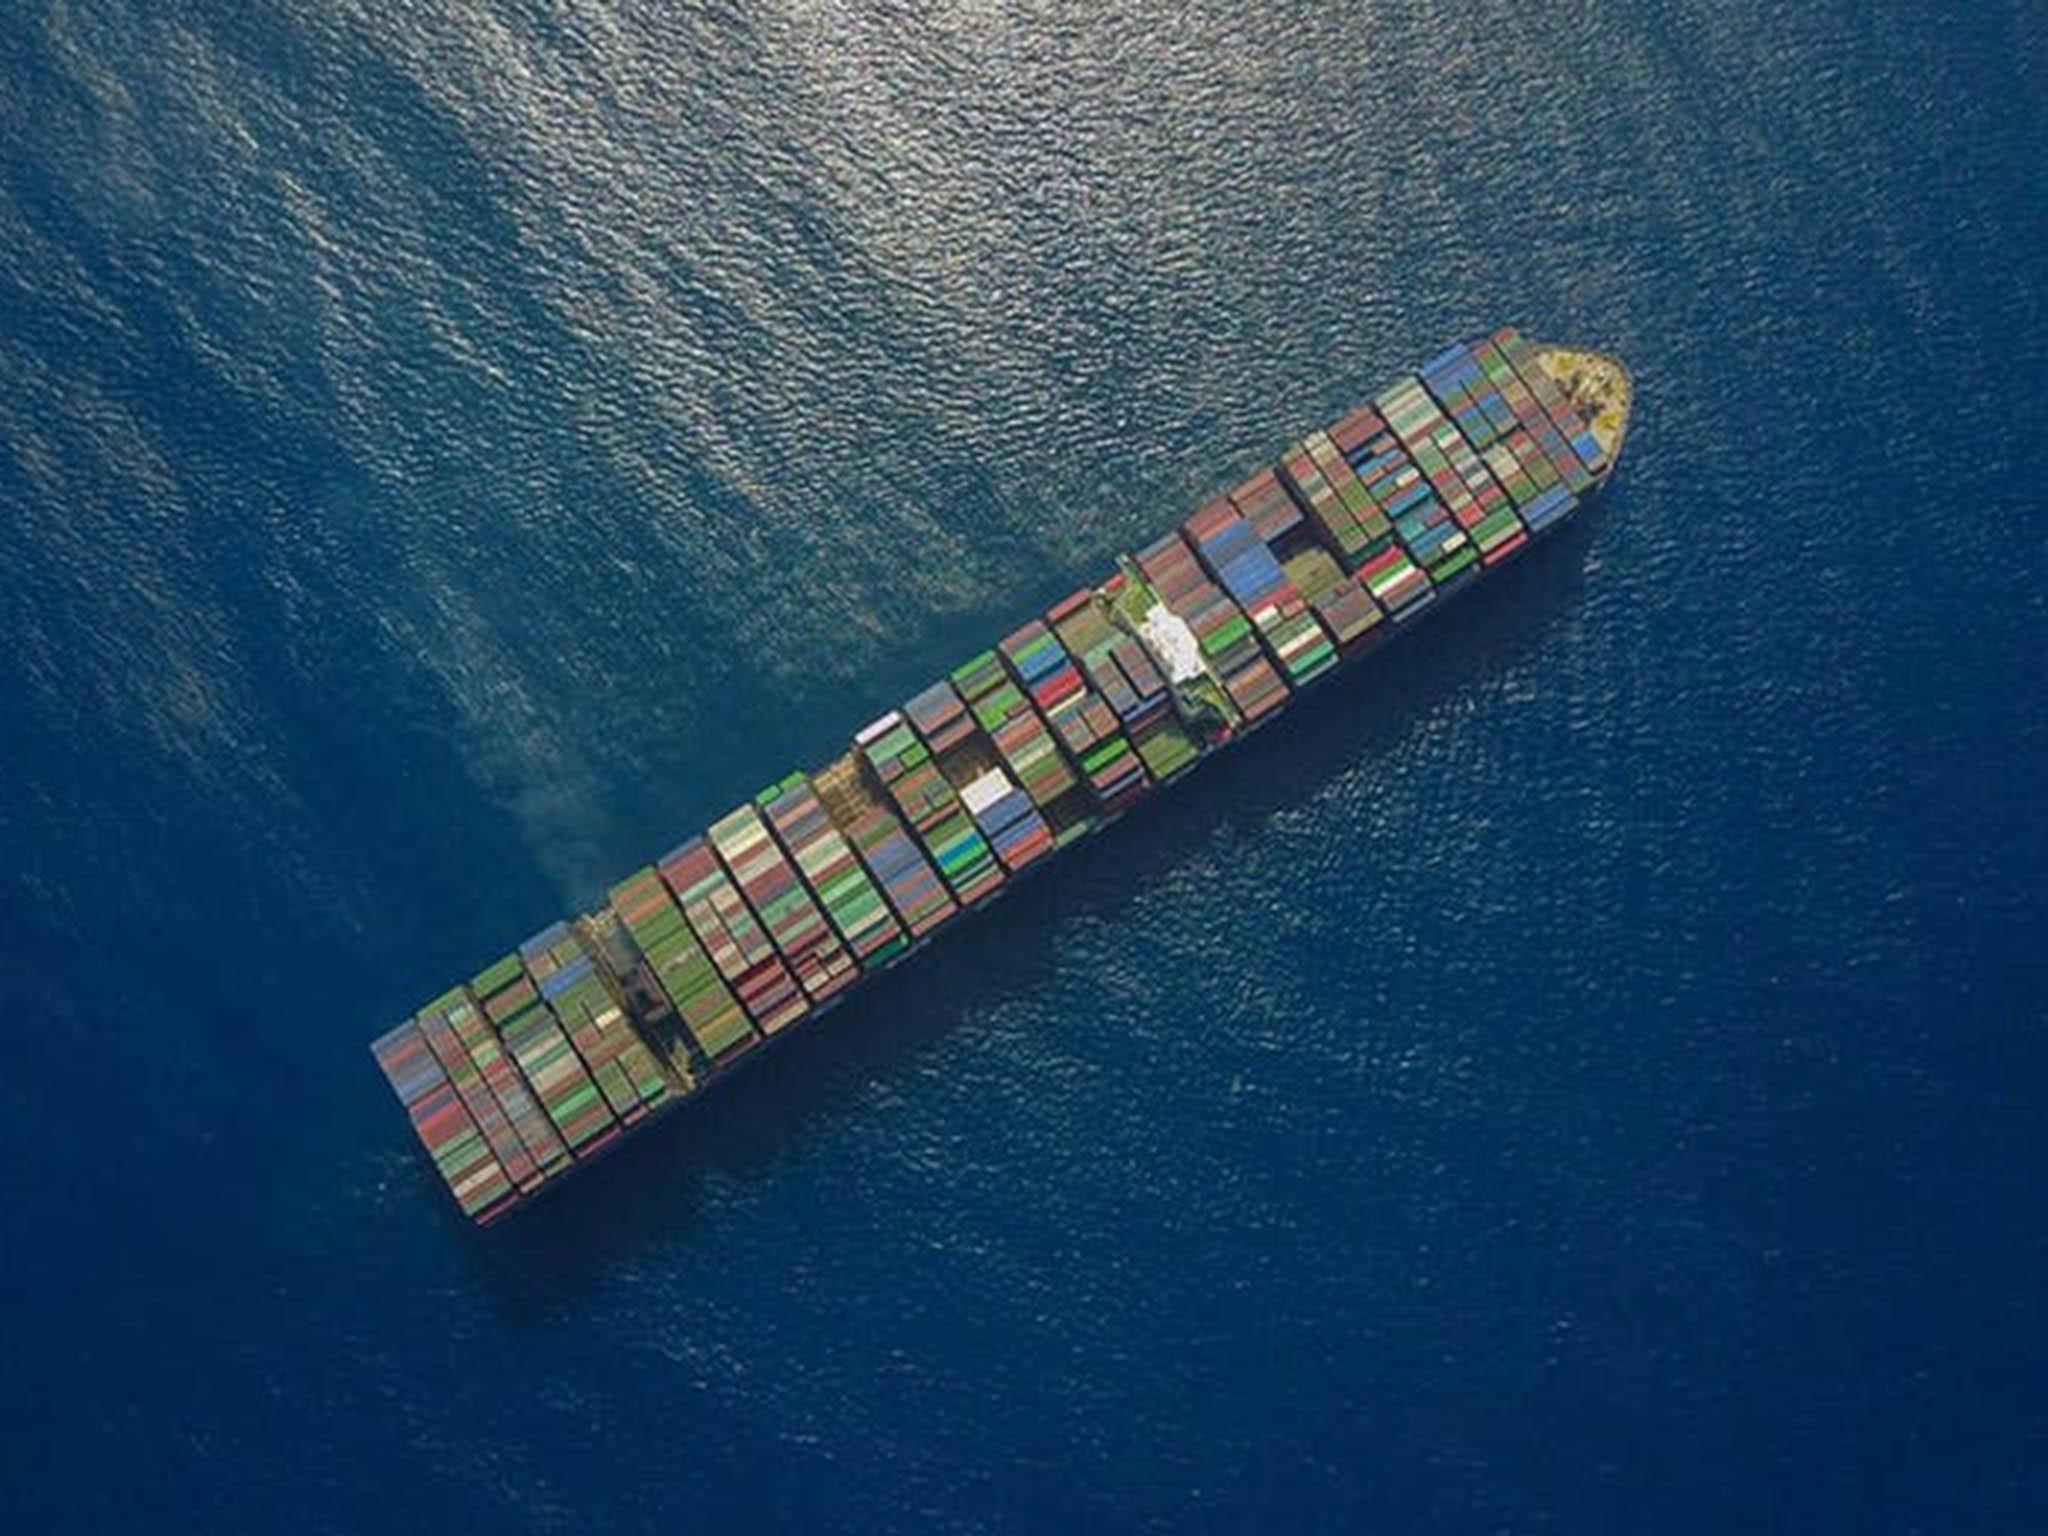 Adrift on a sea of information... cargo vessels can be hacked